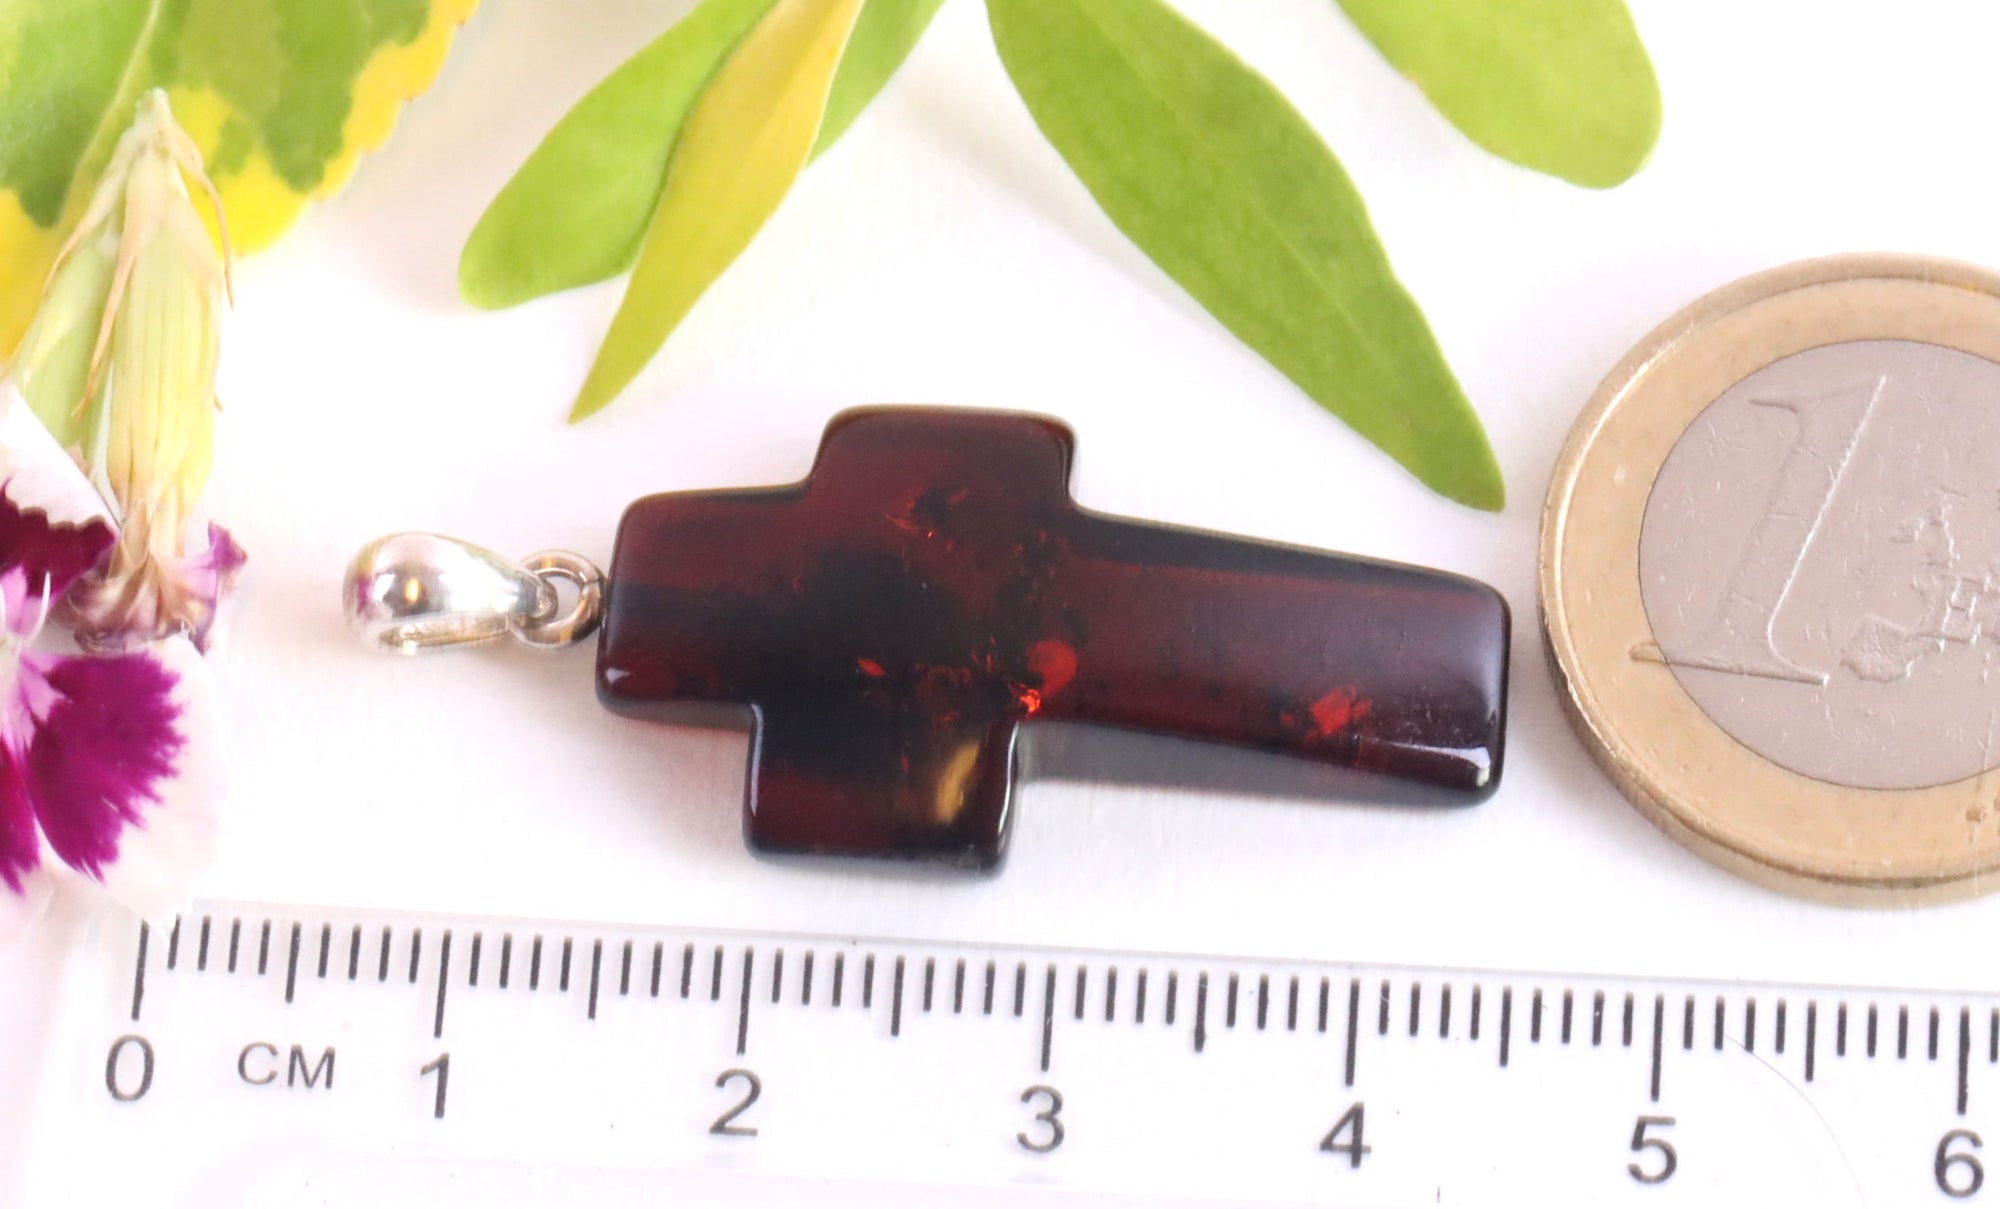 This Weeks Special Offer ! Baltic Amber Cross Pendant.